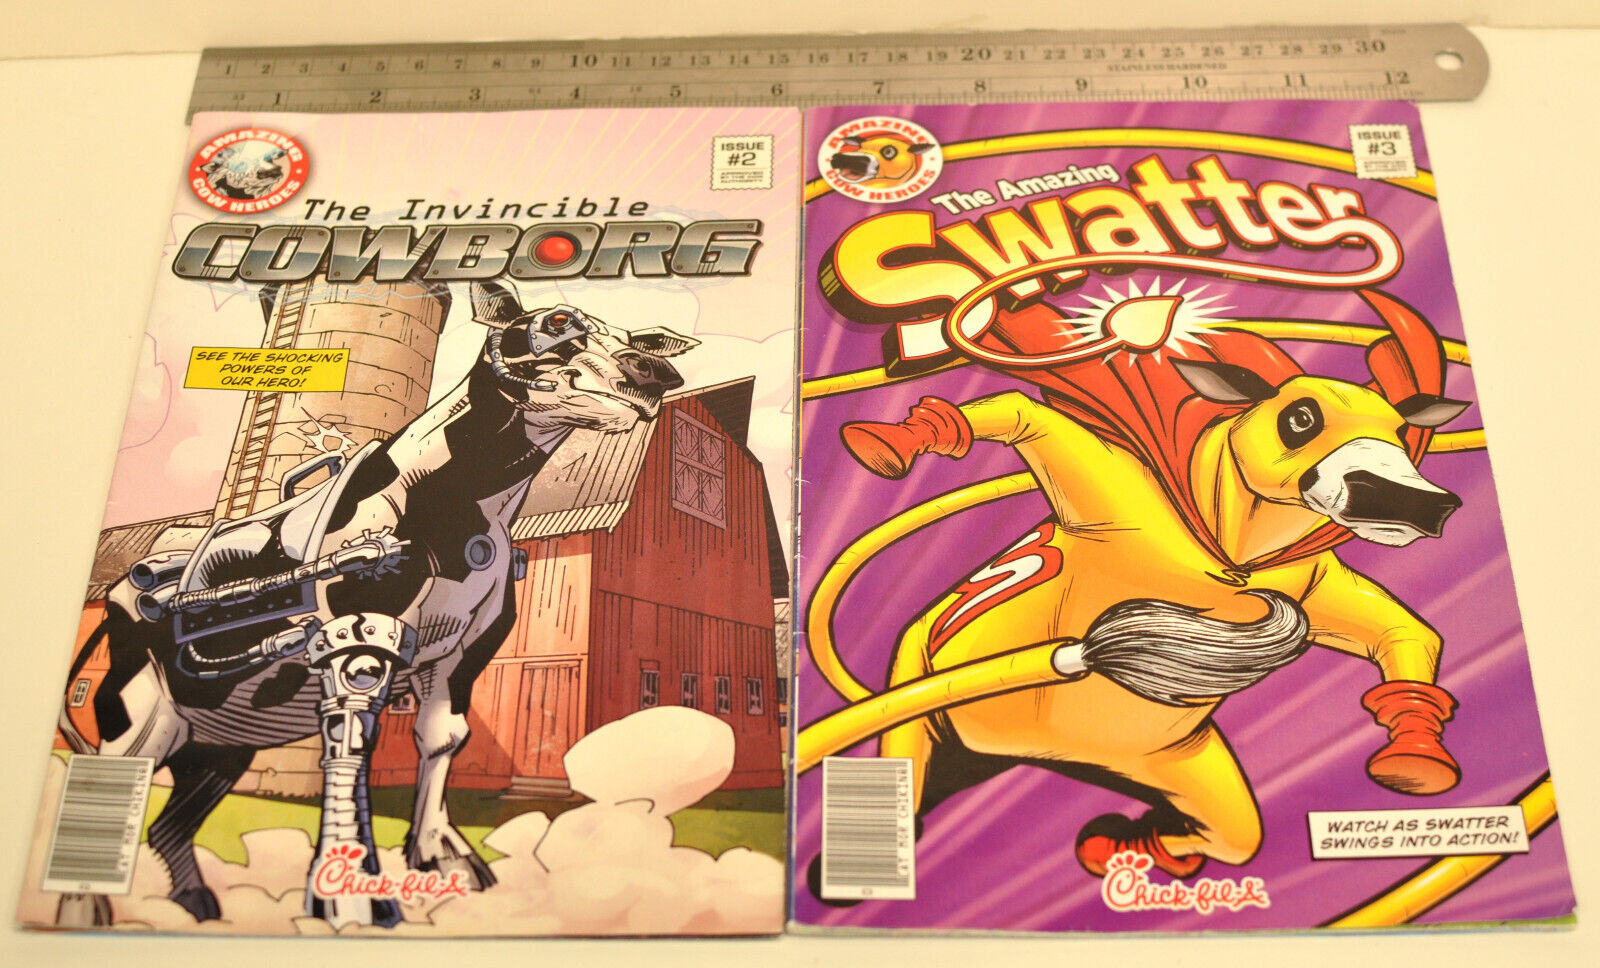 Chick-fil-a, Amazing Cow Heroes Comics Issues #2 and #3 2010-2012